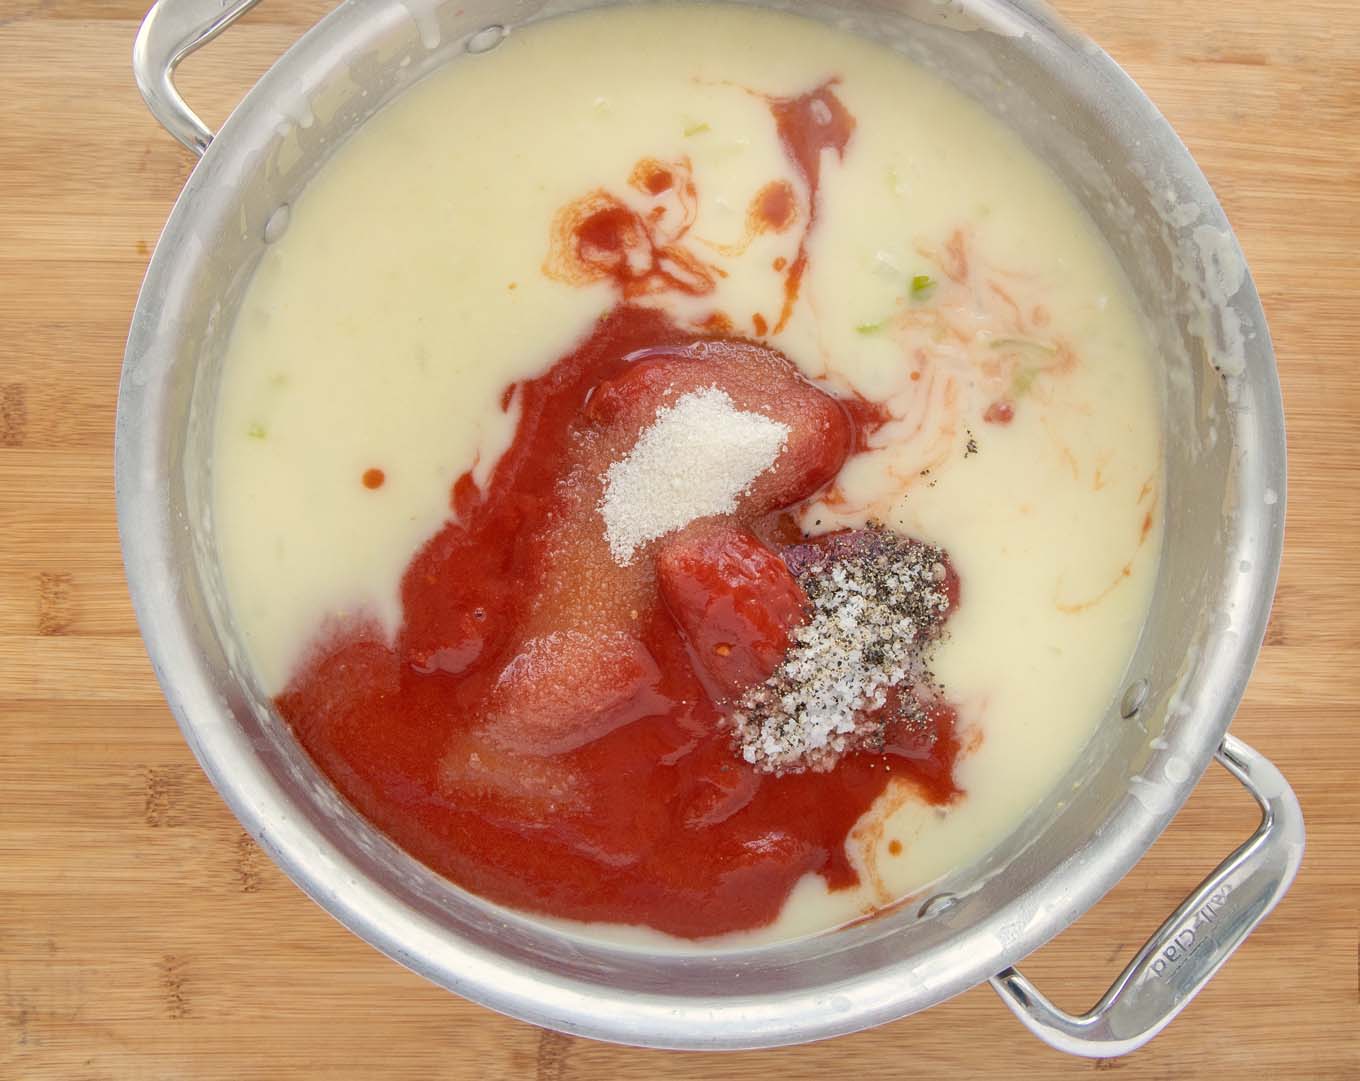 Veloute with tomatoes and seasonings in a large pot.